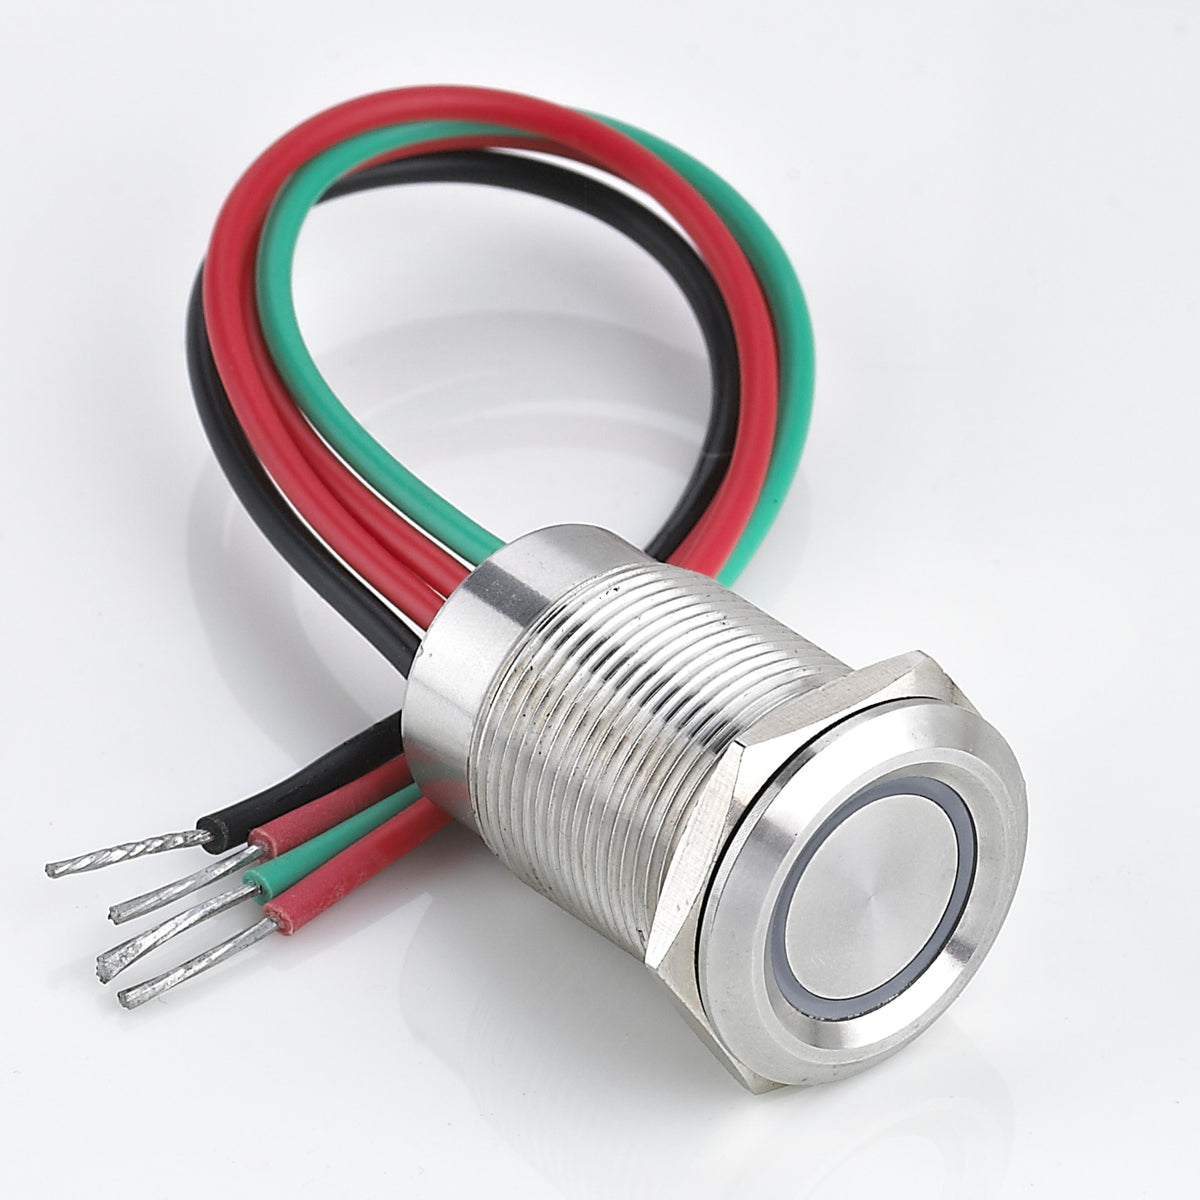 19mm capacitive touch switch Momentary Ring LED Stainless Steel 1 Normally-Open